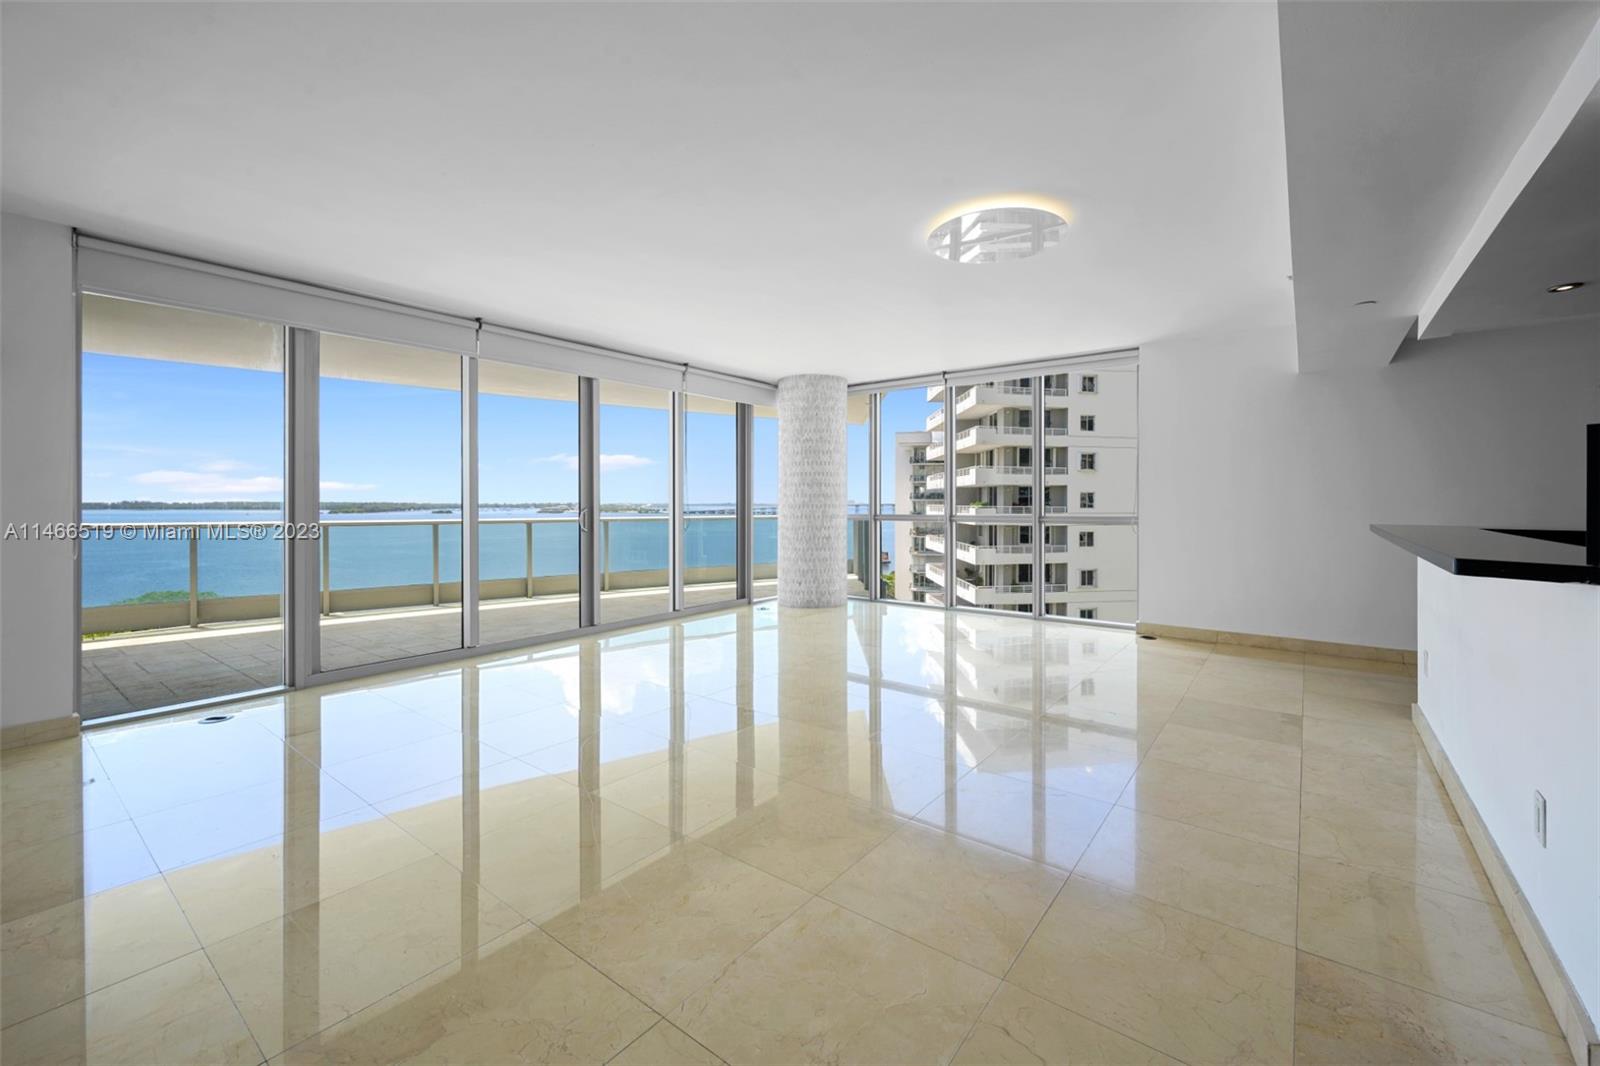 Breathtaking bay views in this spacious 2 bed/2 and half bath. Marble floors all through-out, One of the best lines in the building.